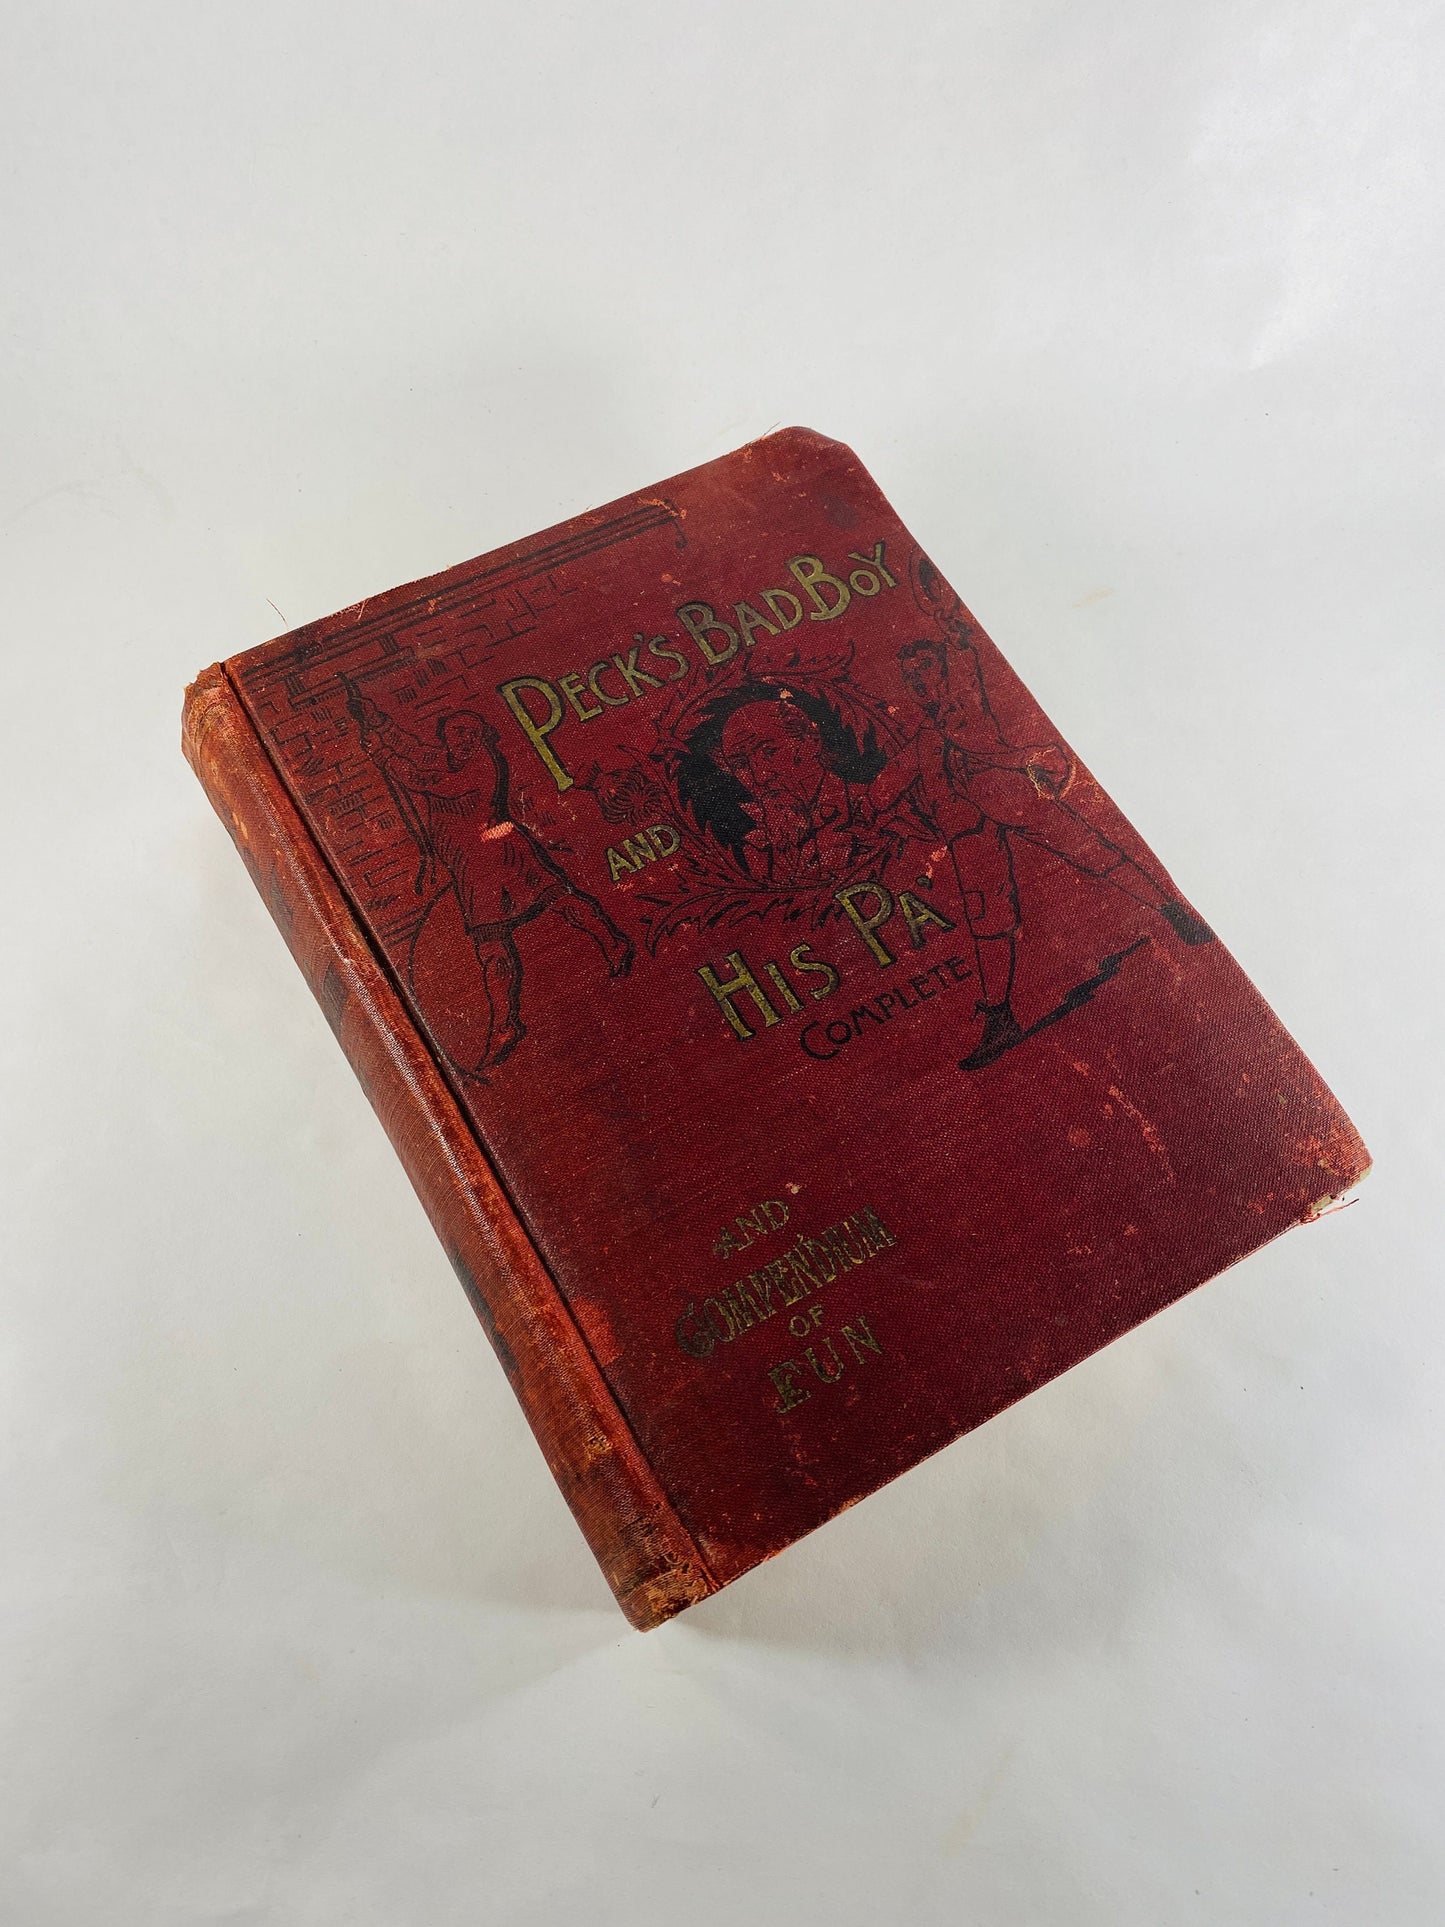 Basis for Huckleberry Finn Antique Peck's Bad Boy and his Pa by George Peck vintage book circa 1900 abou the mischievous prankster Red decor